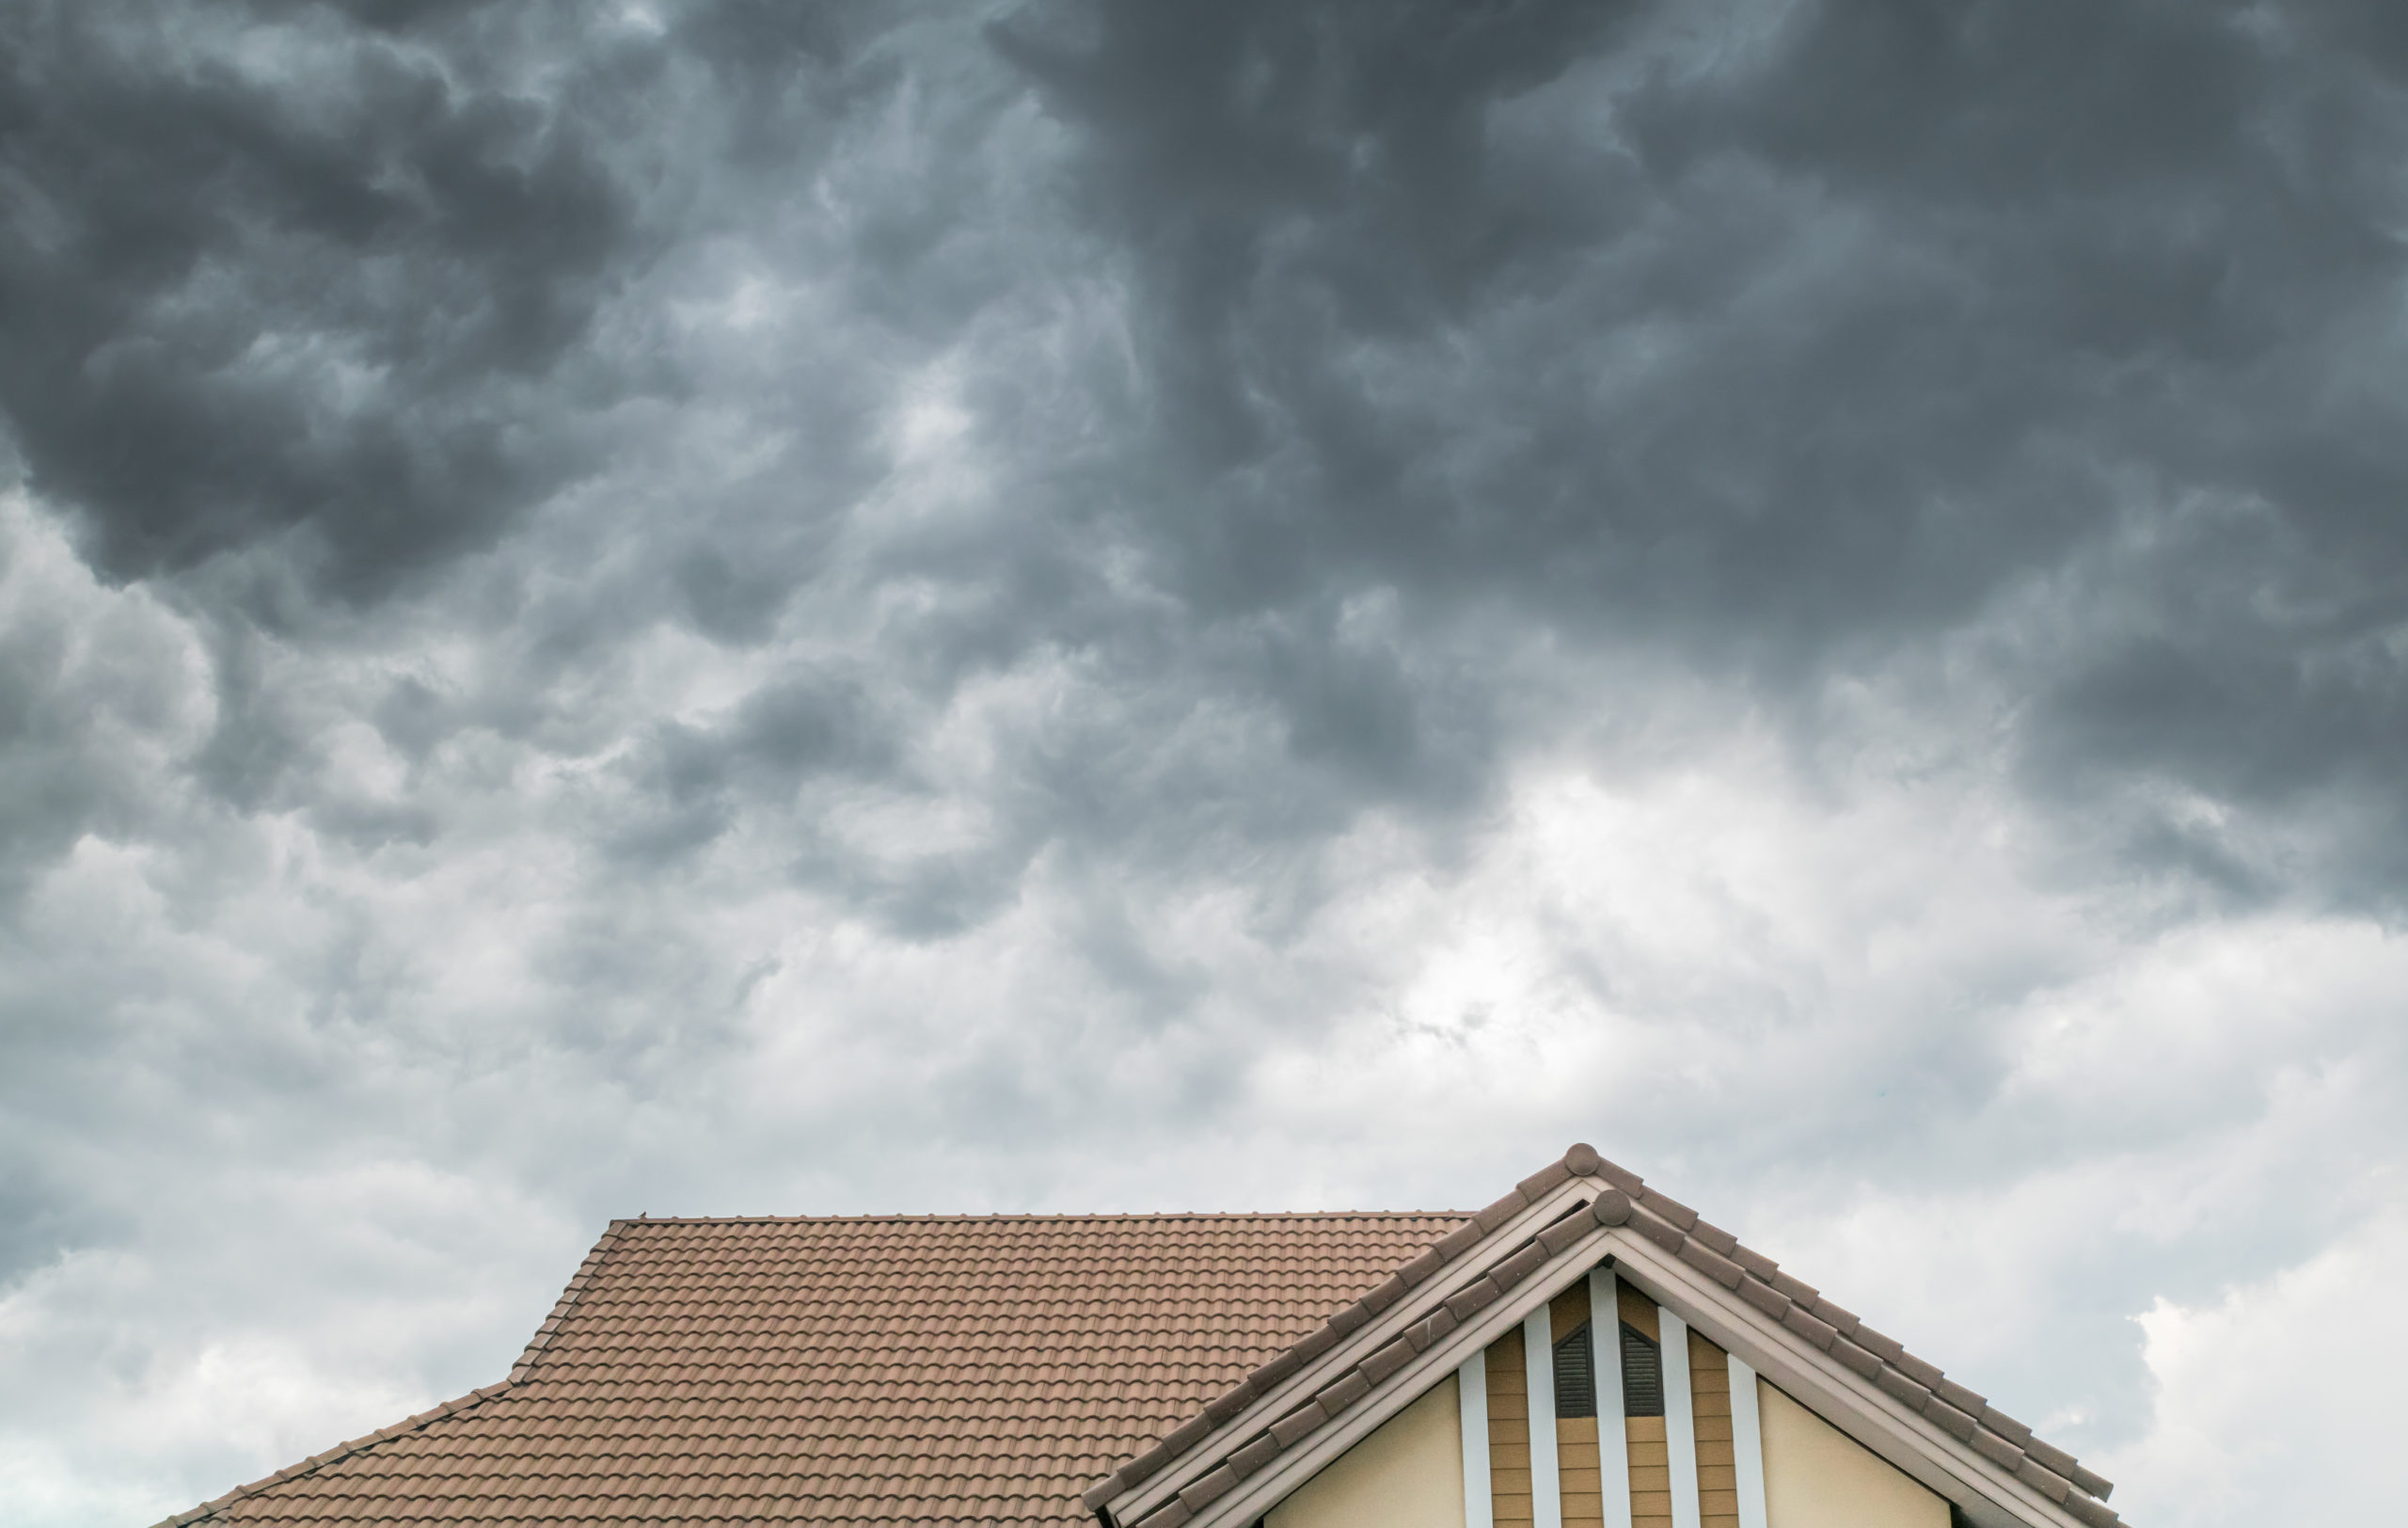 Dark storms clouds form over a residential home